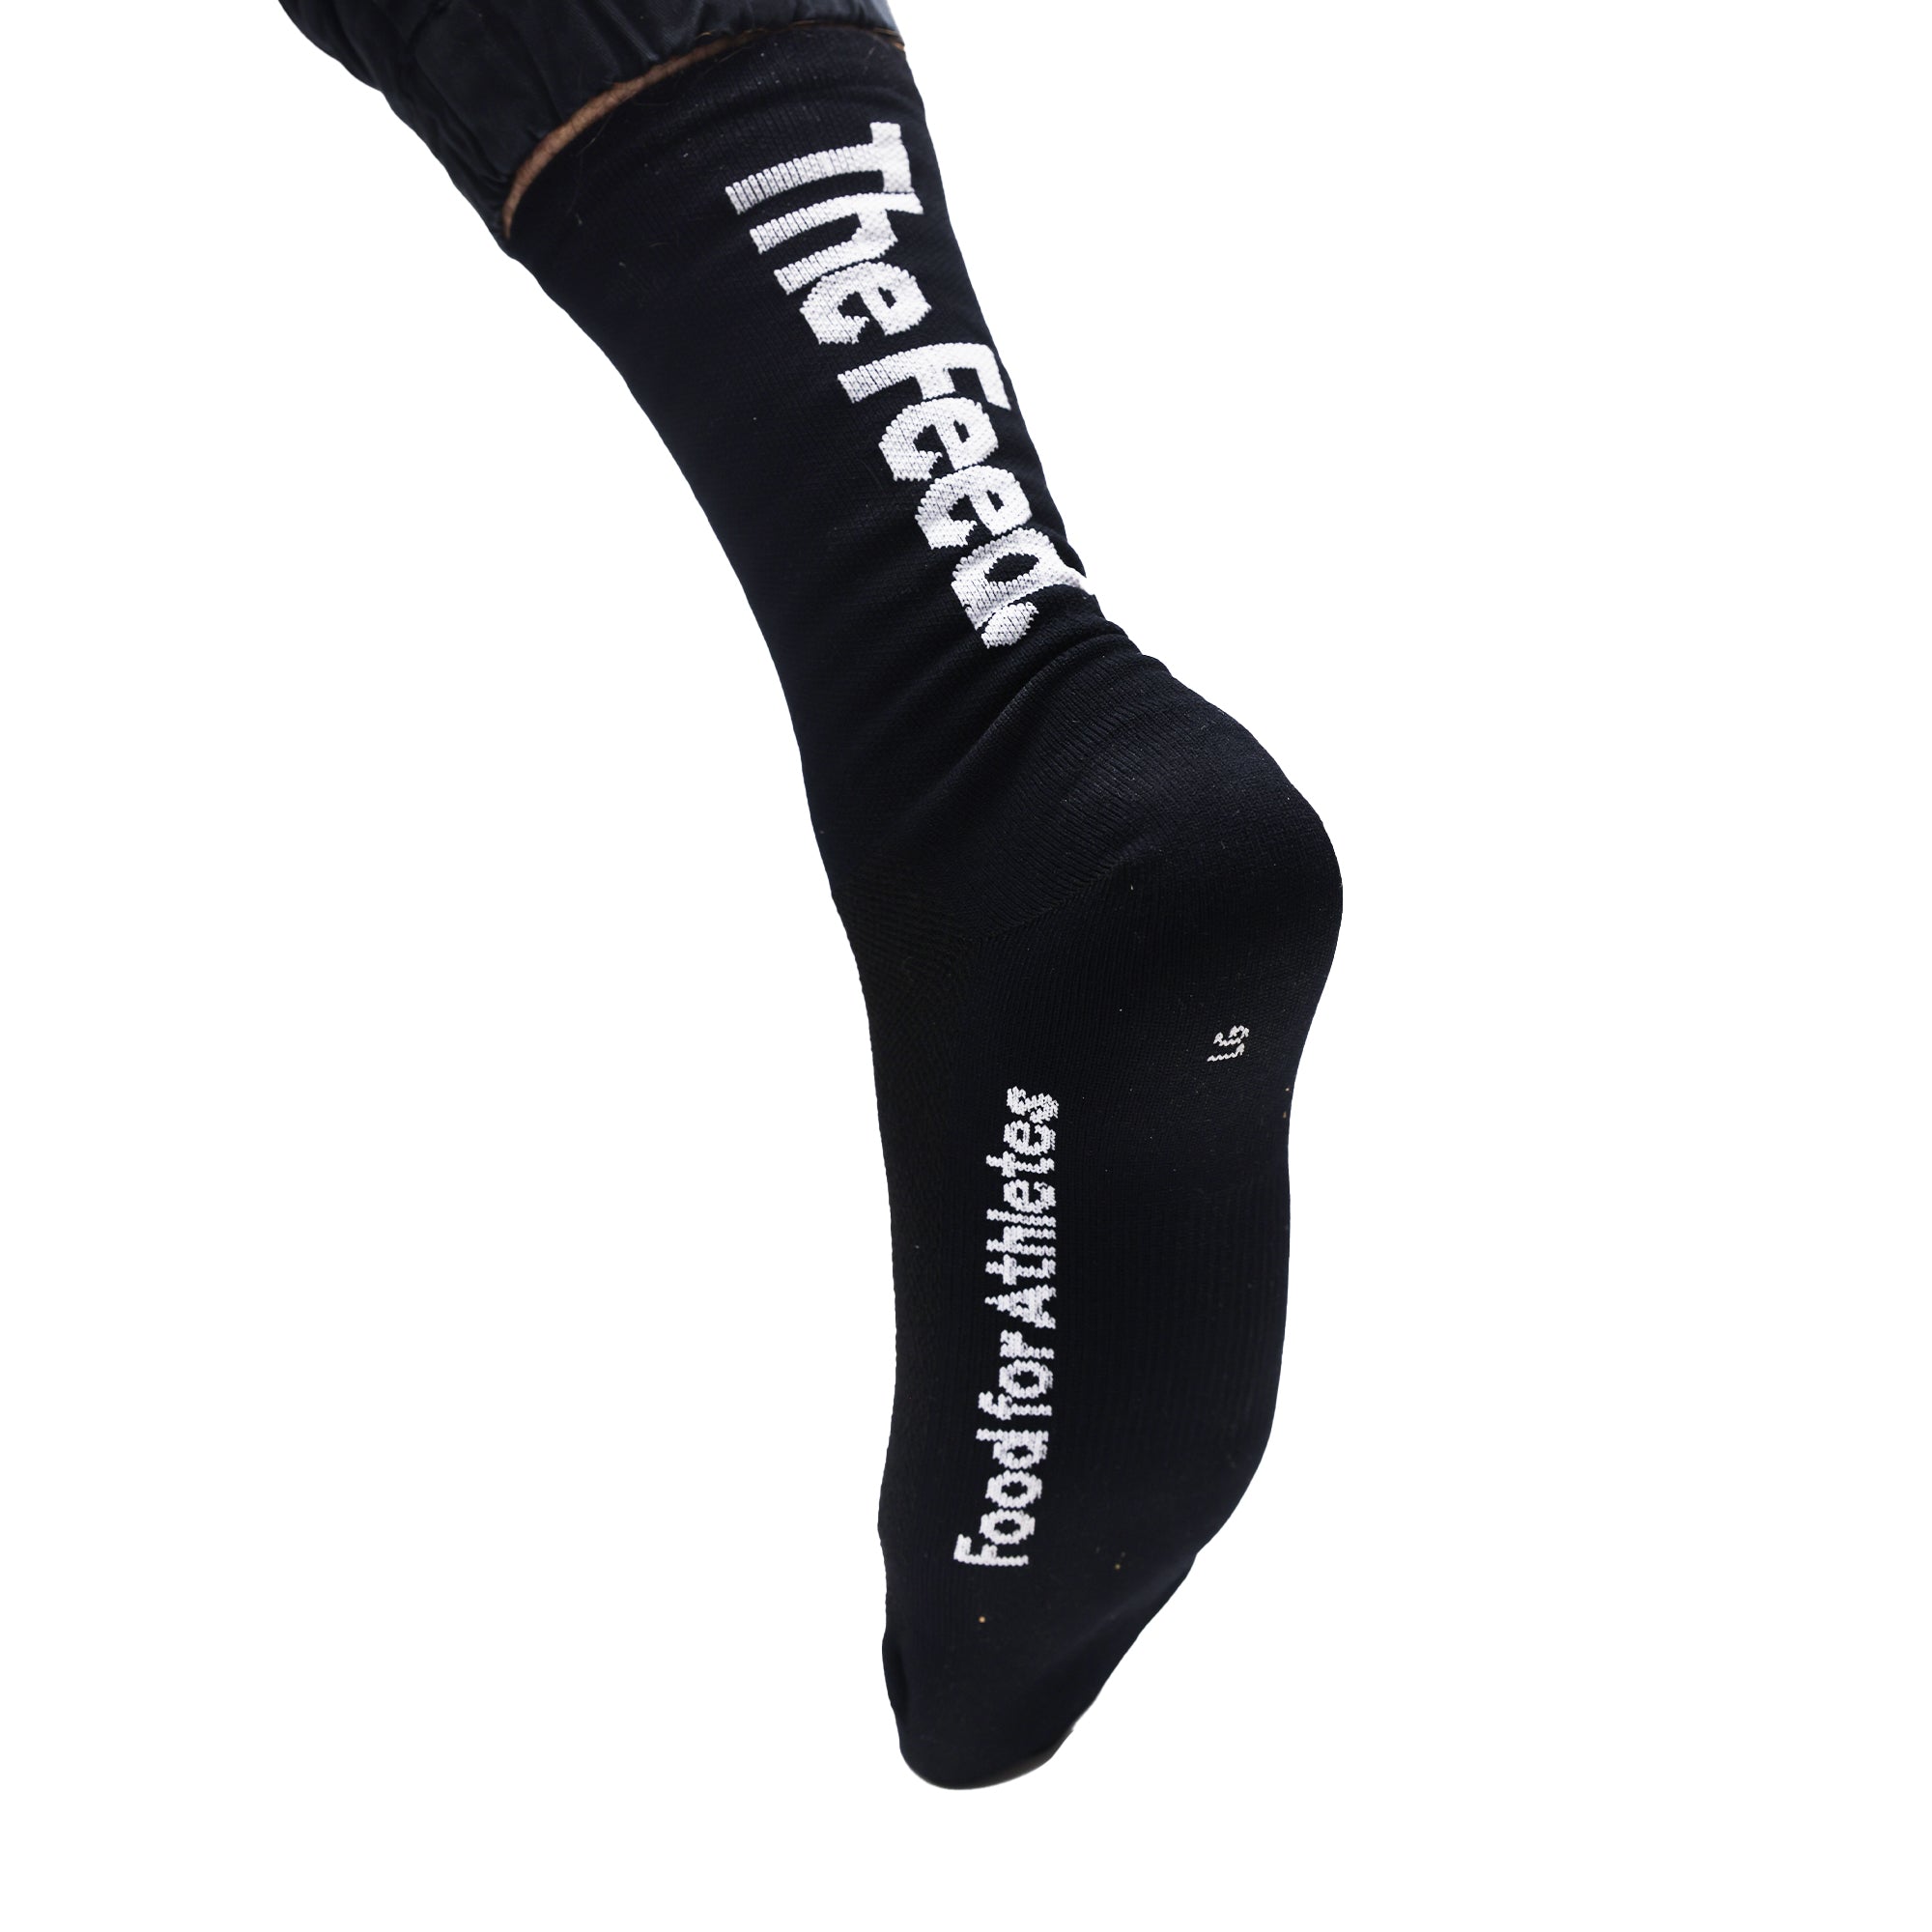 Crew socks — what are they, and do you need them?